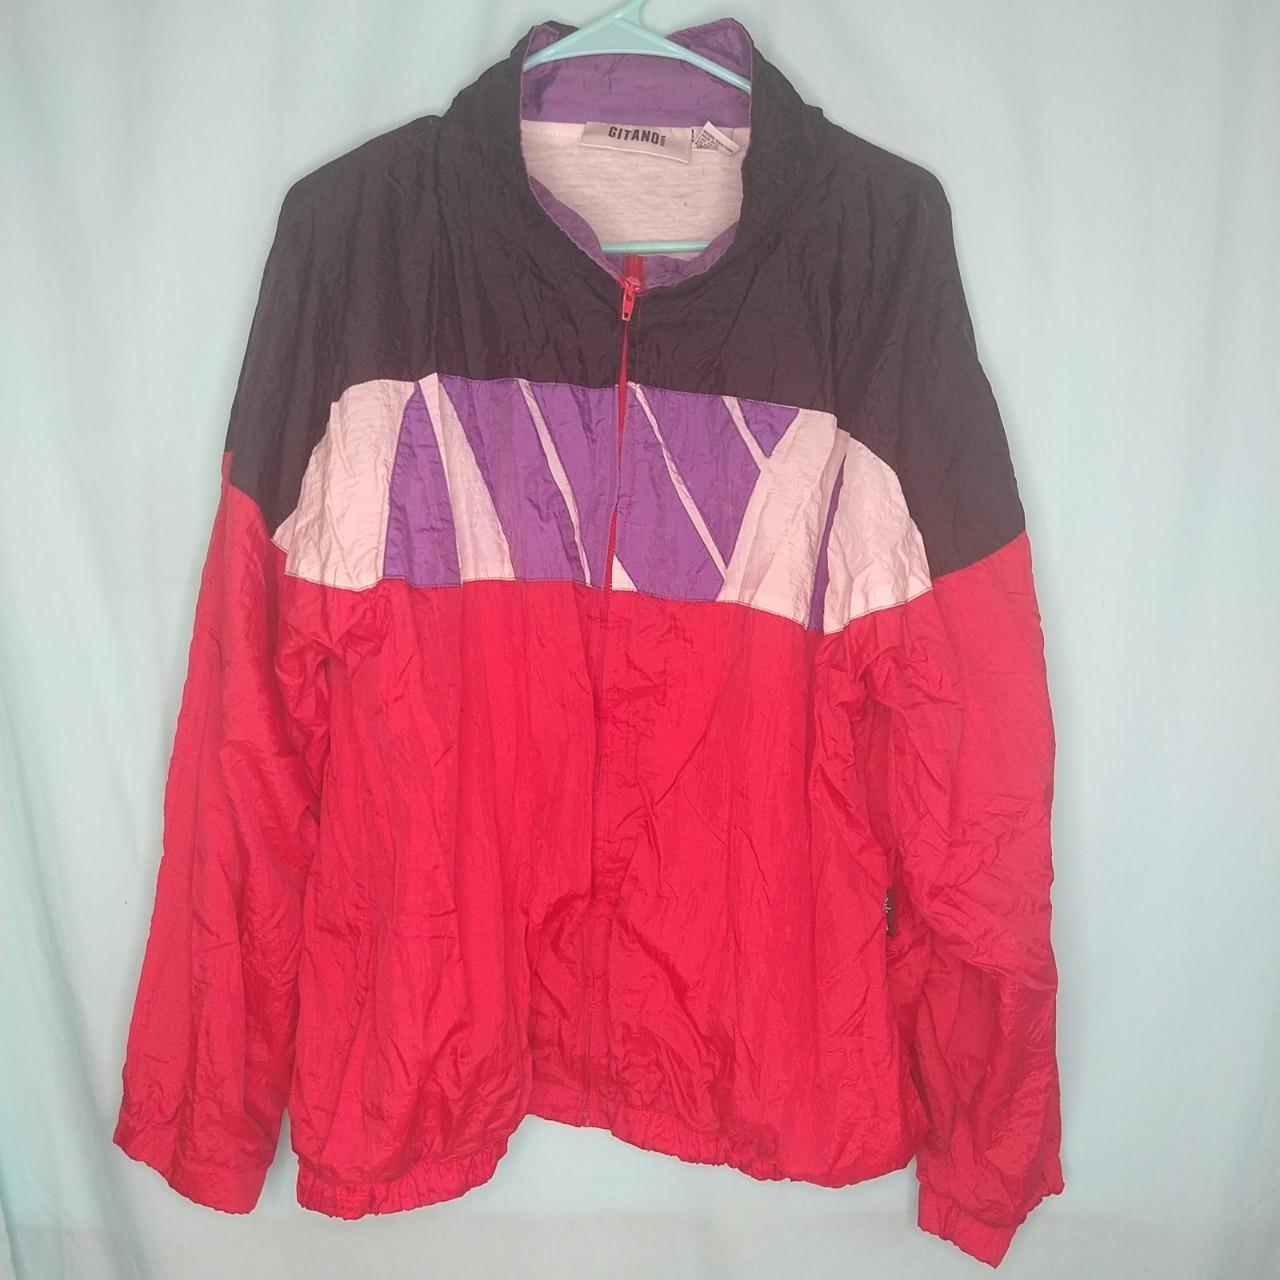 Men's Red and Purple Jacket